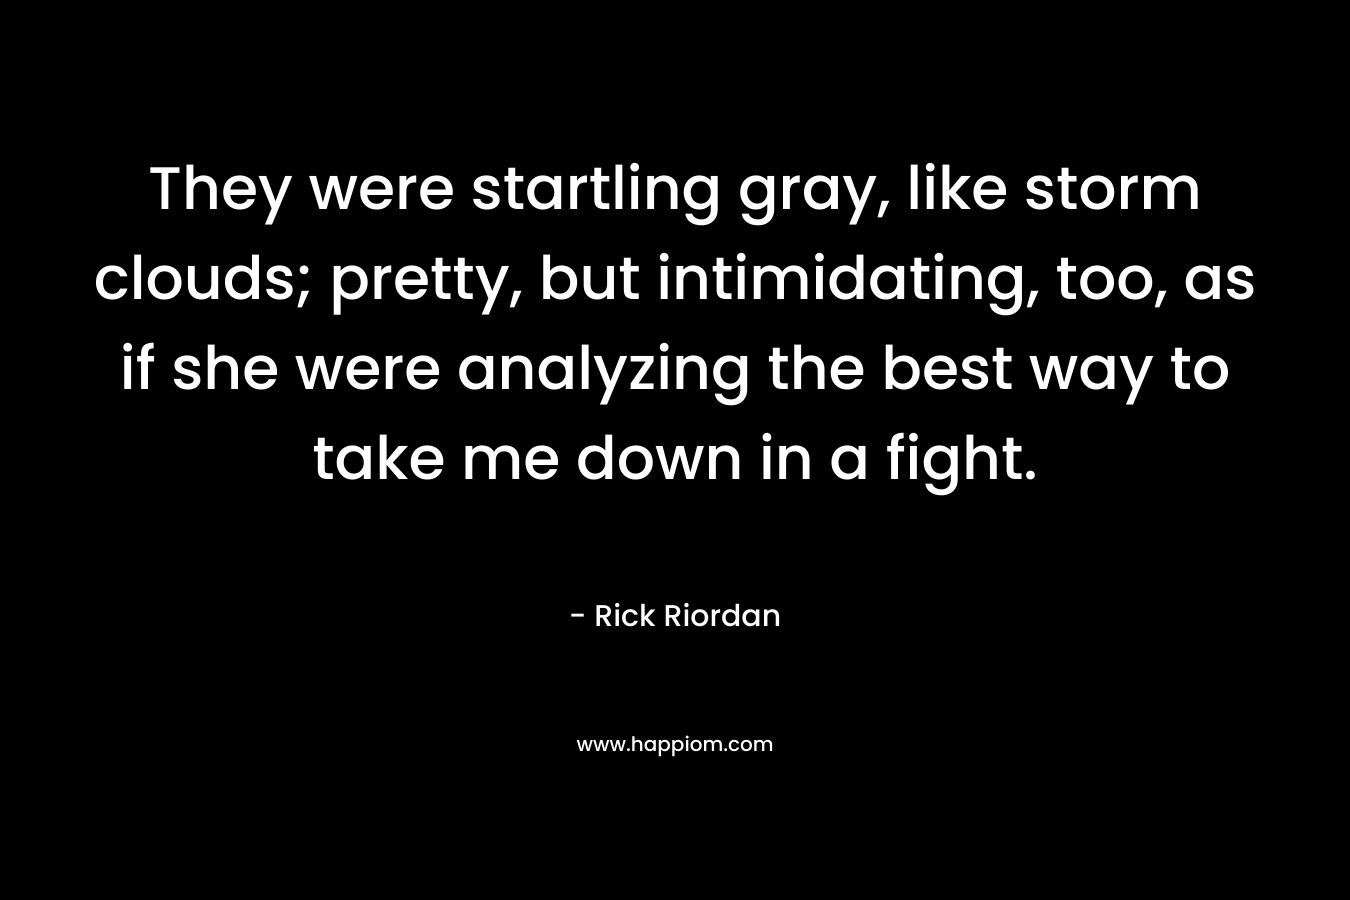 They were startling gray, like storm clouds; pretty, but intimidating, too, as if she were analyzing the best way to take me down in a fight. – Rick Riordan